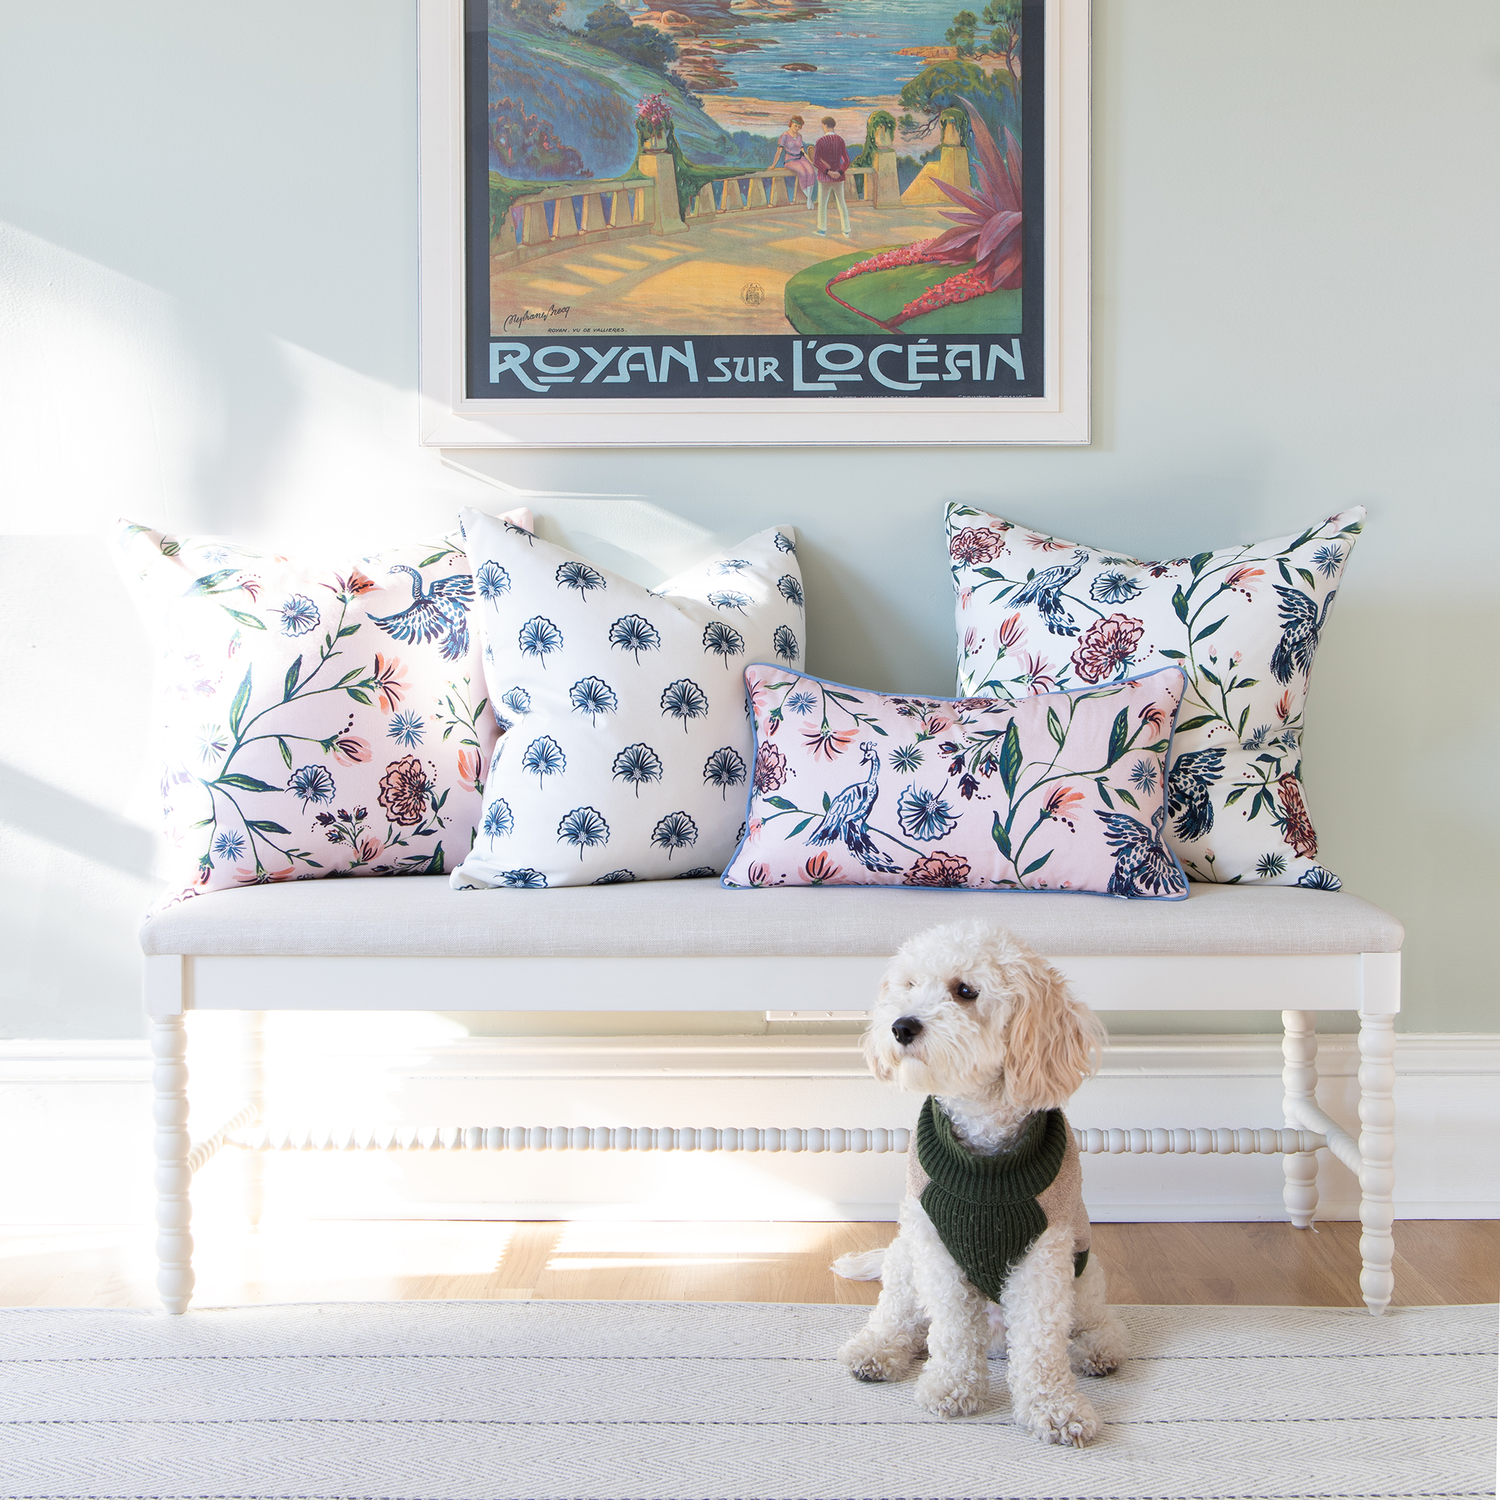 Space styled with Cream Chinoiserie, Rose Chinoiserie, and Floral Navy pillows on white bench with dog wearing a green vest in front of wall with painting